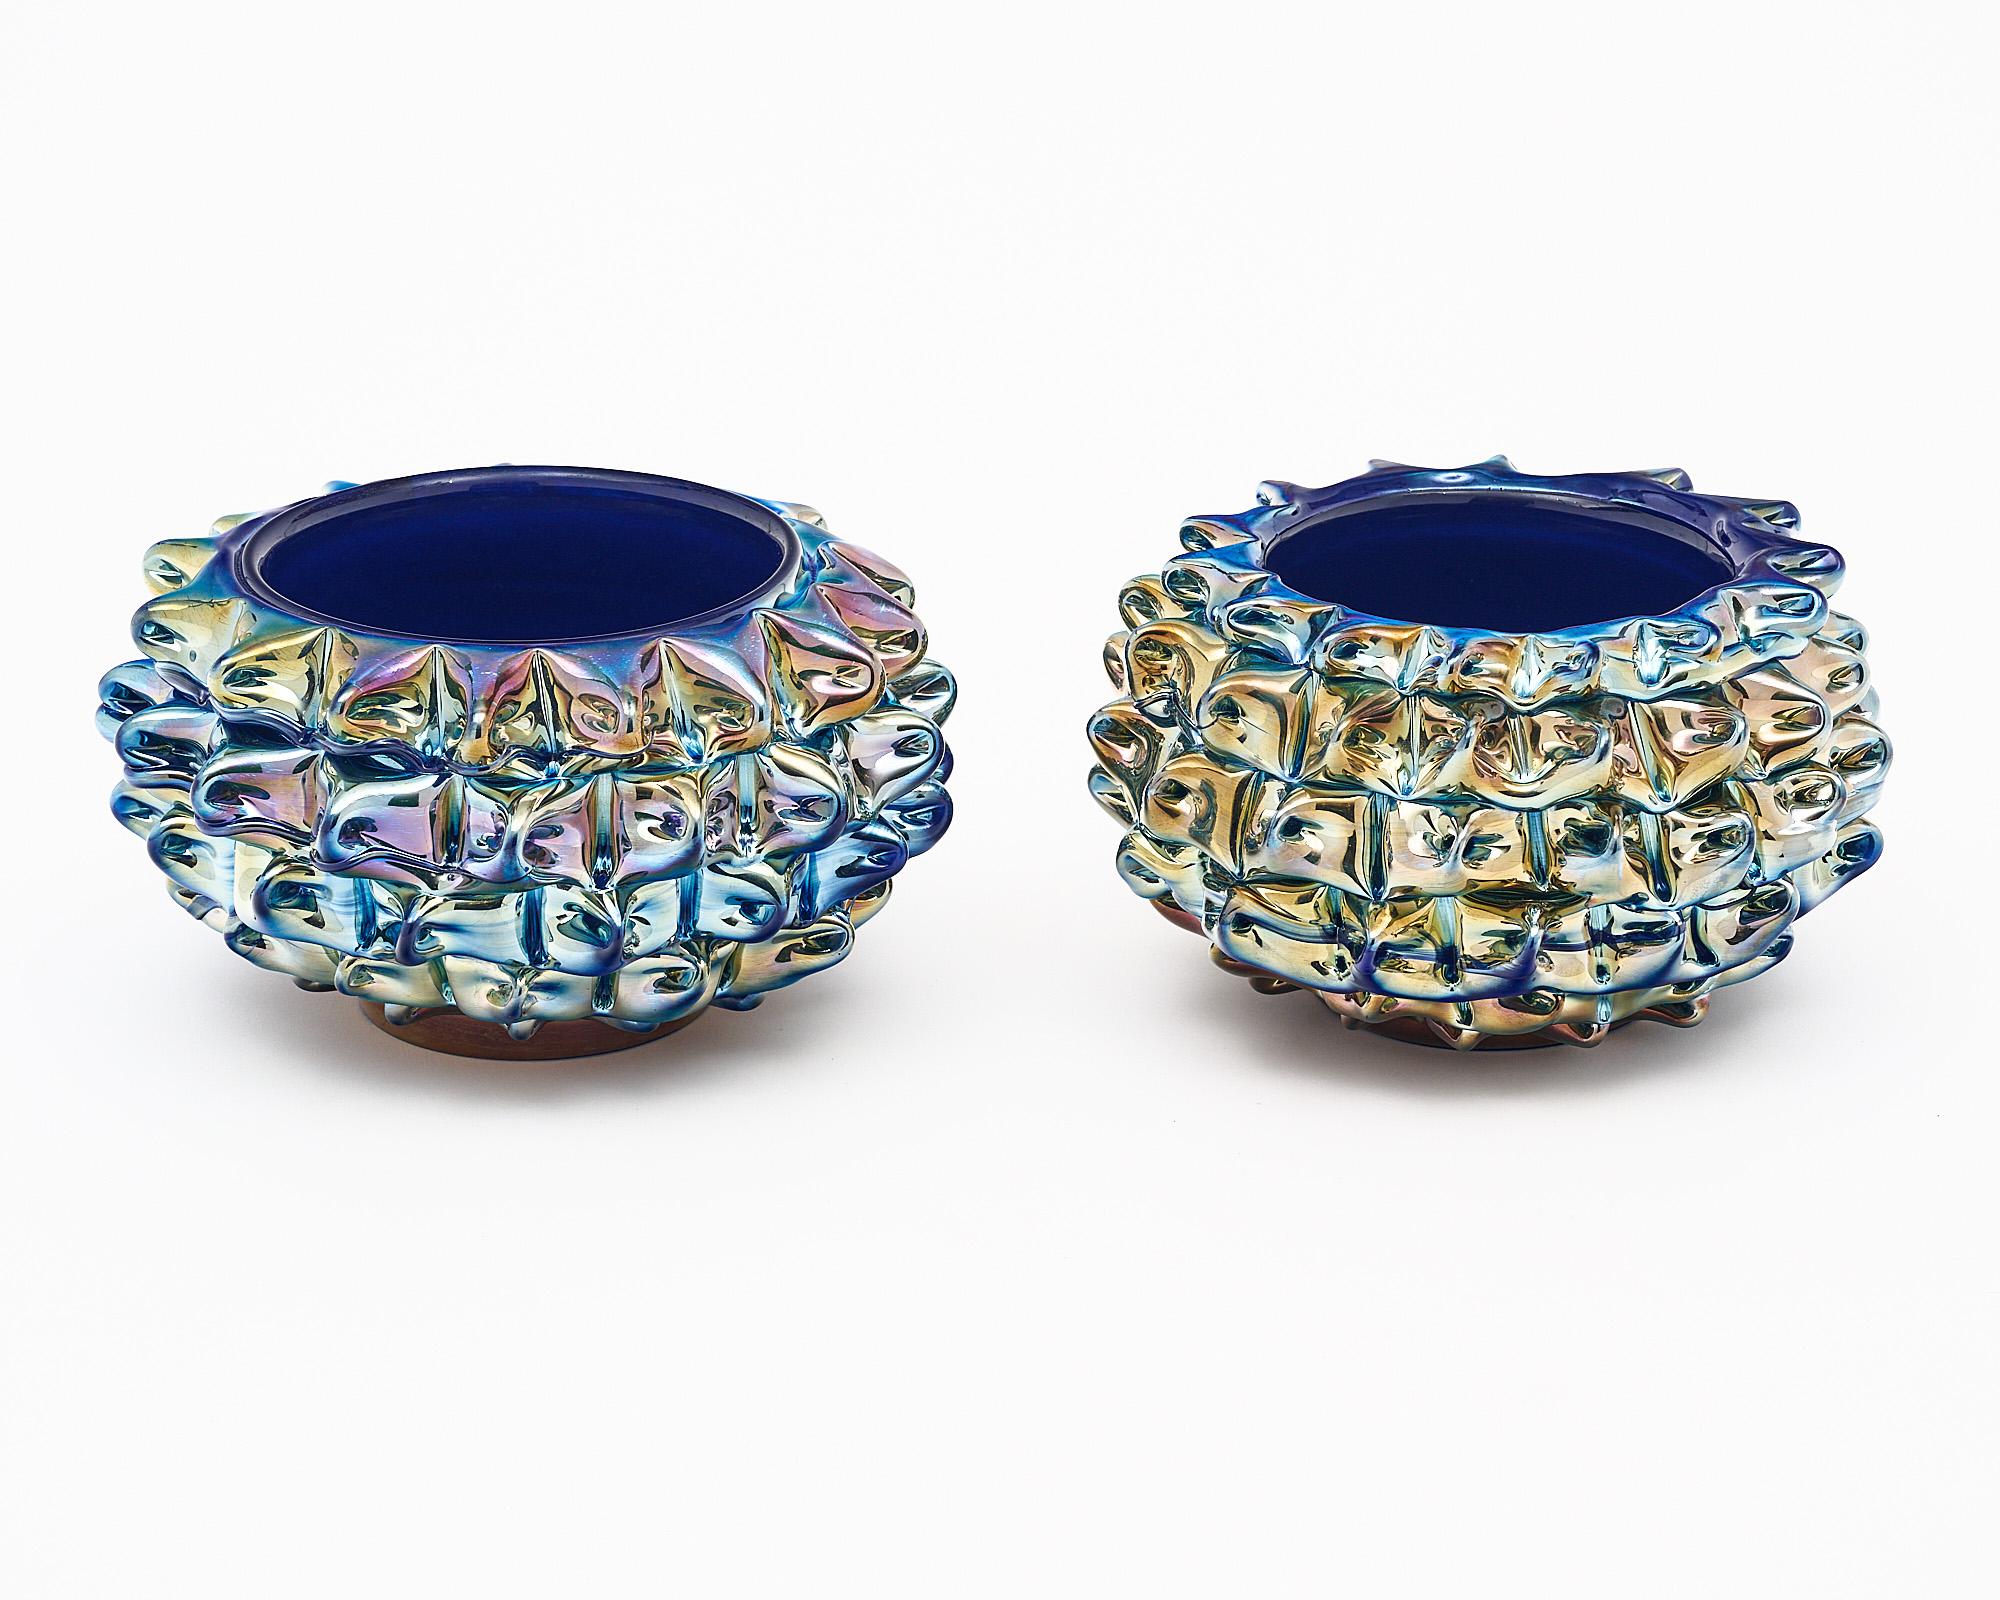 Pair of Murano glass bowls, Italian, from the island of Murano and crafted in the manner of Barovier. This hand-blown pair is made using the incamiciato technique where several layers of varying colors are used to create a unique color and depth.